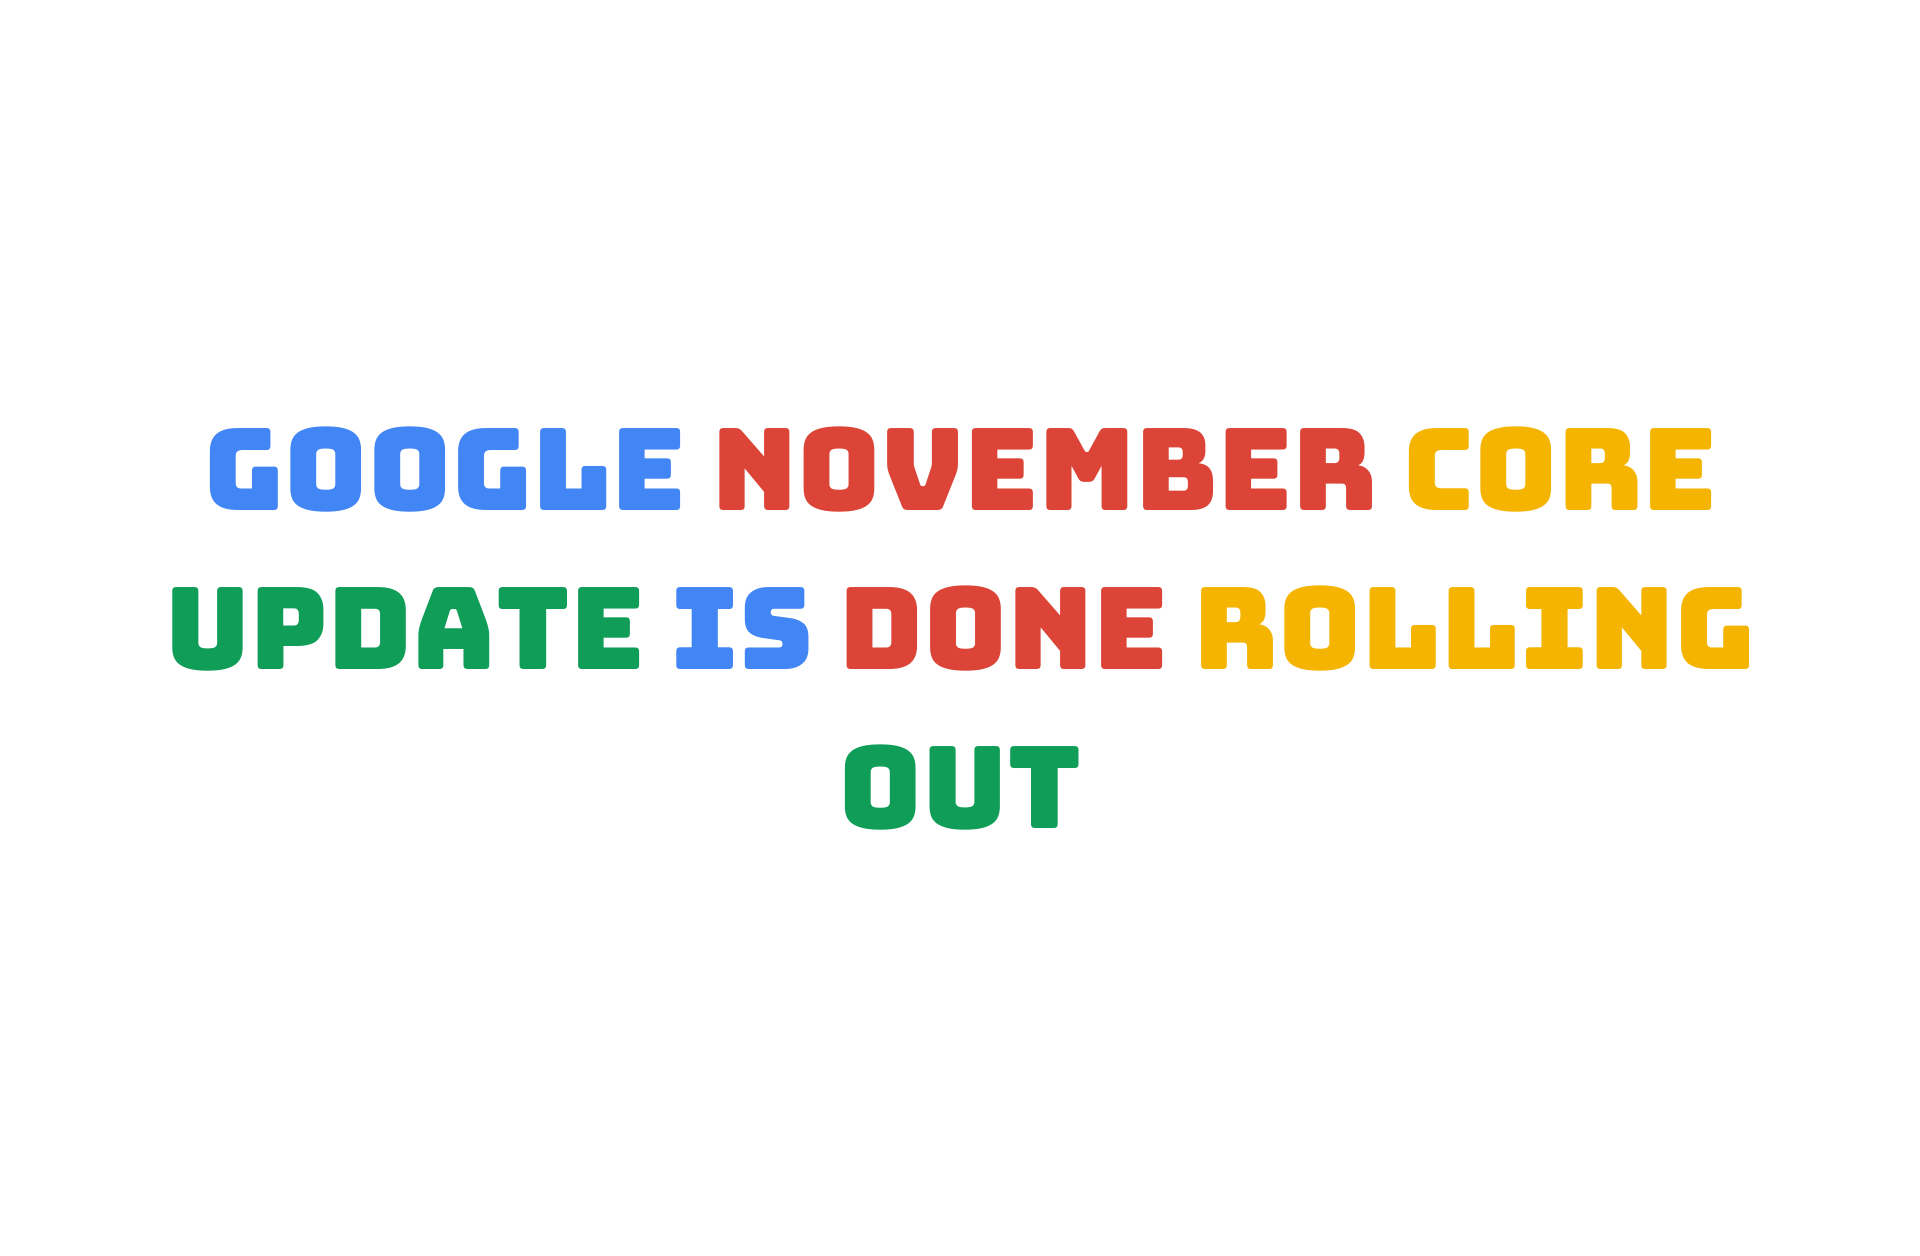 You are currently viewing Google November 2021 Core Update is Finished Rolling Out